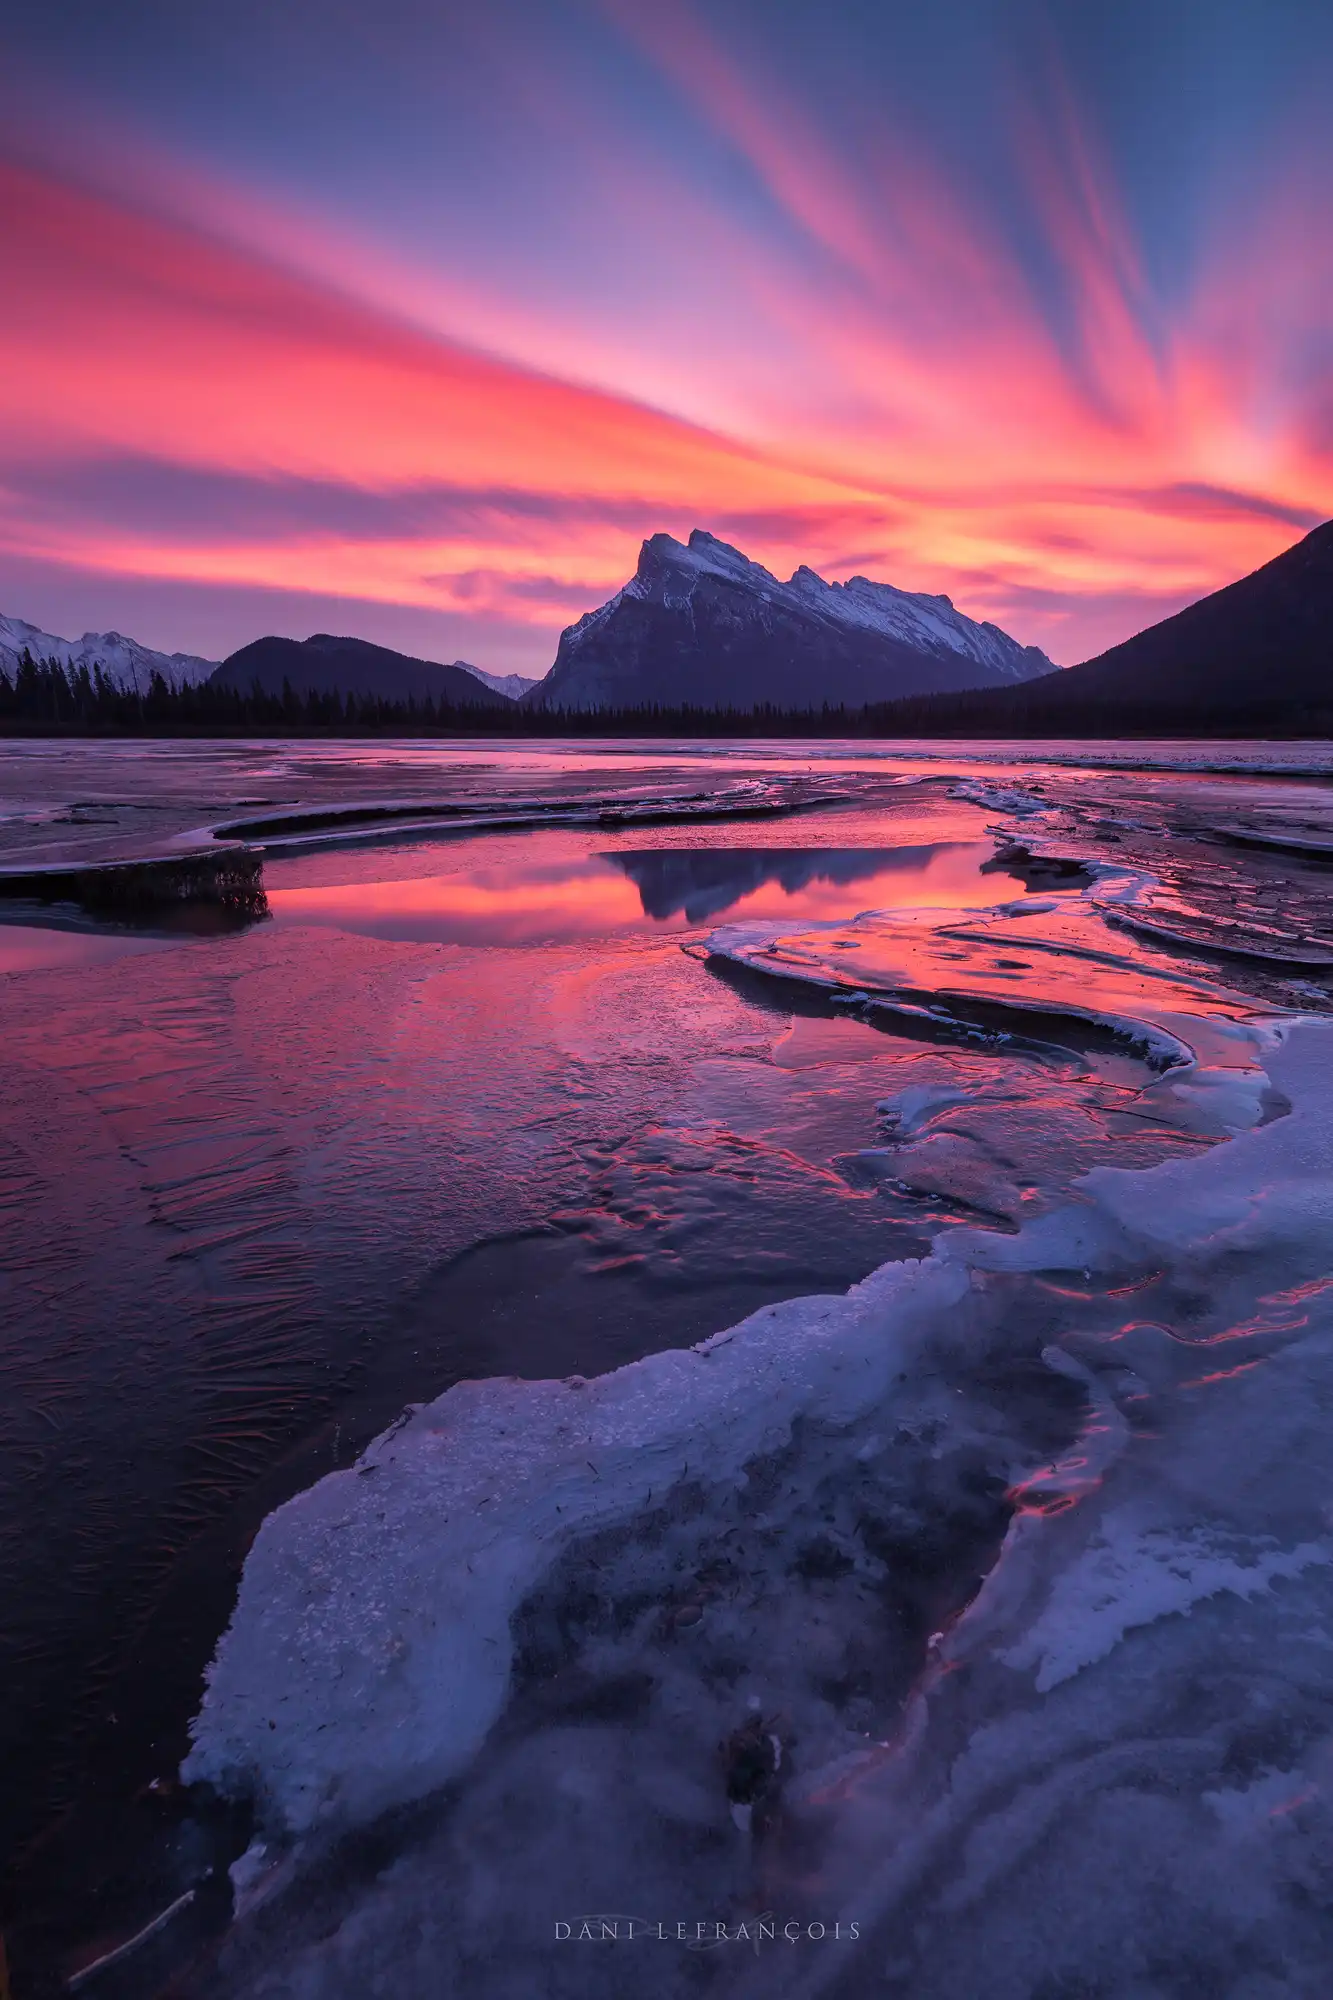 10 Jaw-Dropping Examples of Landscape Photography